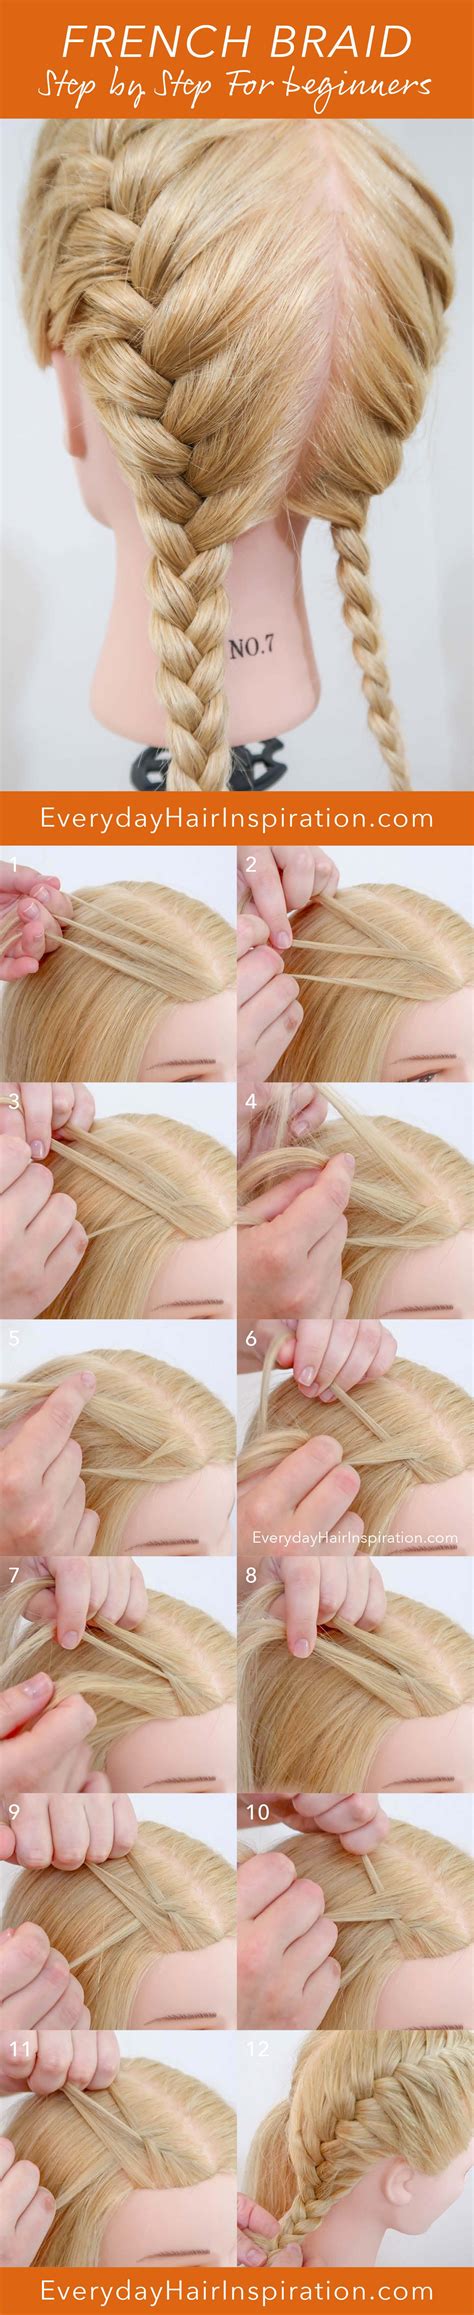 Awhile ago, we put out a how to do a french braid for beginners video (which basically showed the mechanics of how a french braid is made.). French Braid For Beginners - Everyday Hair inspiration - FRENCH BRAIDS